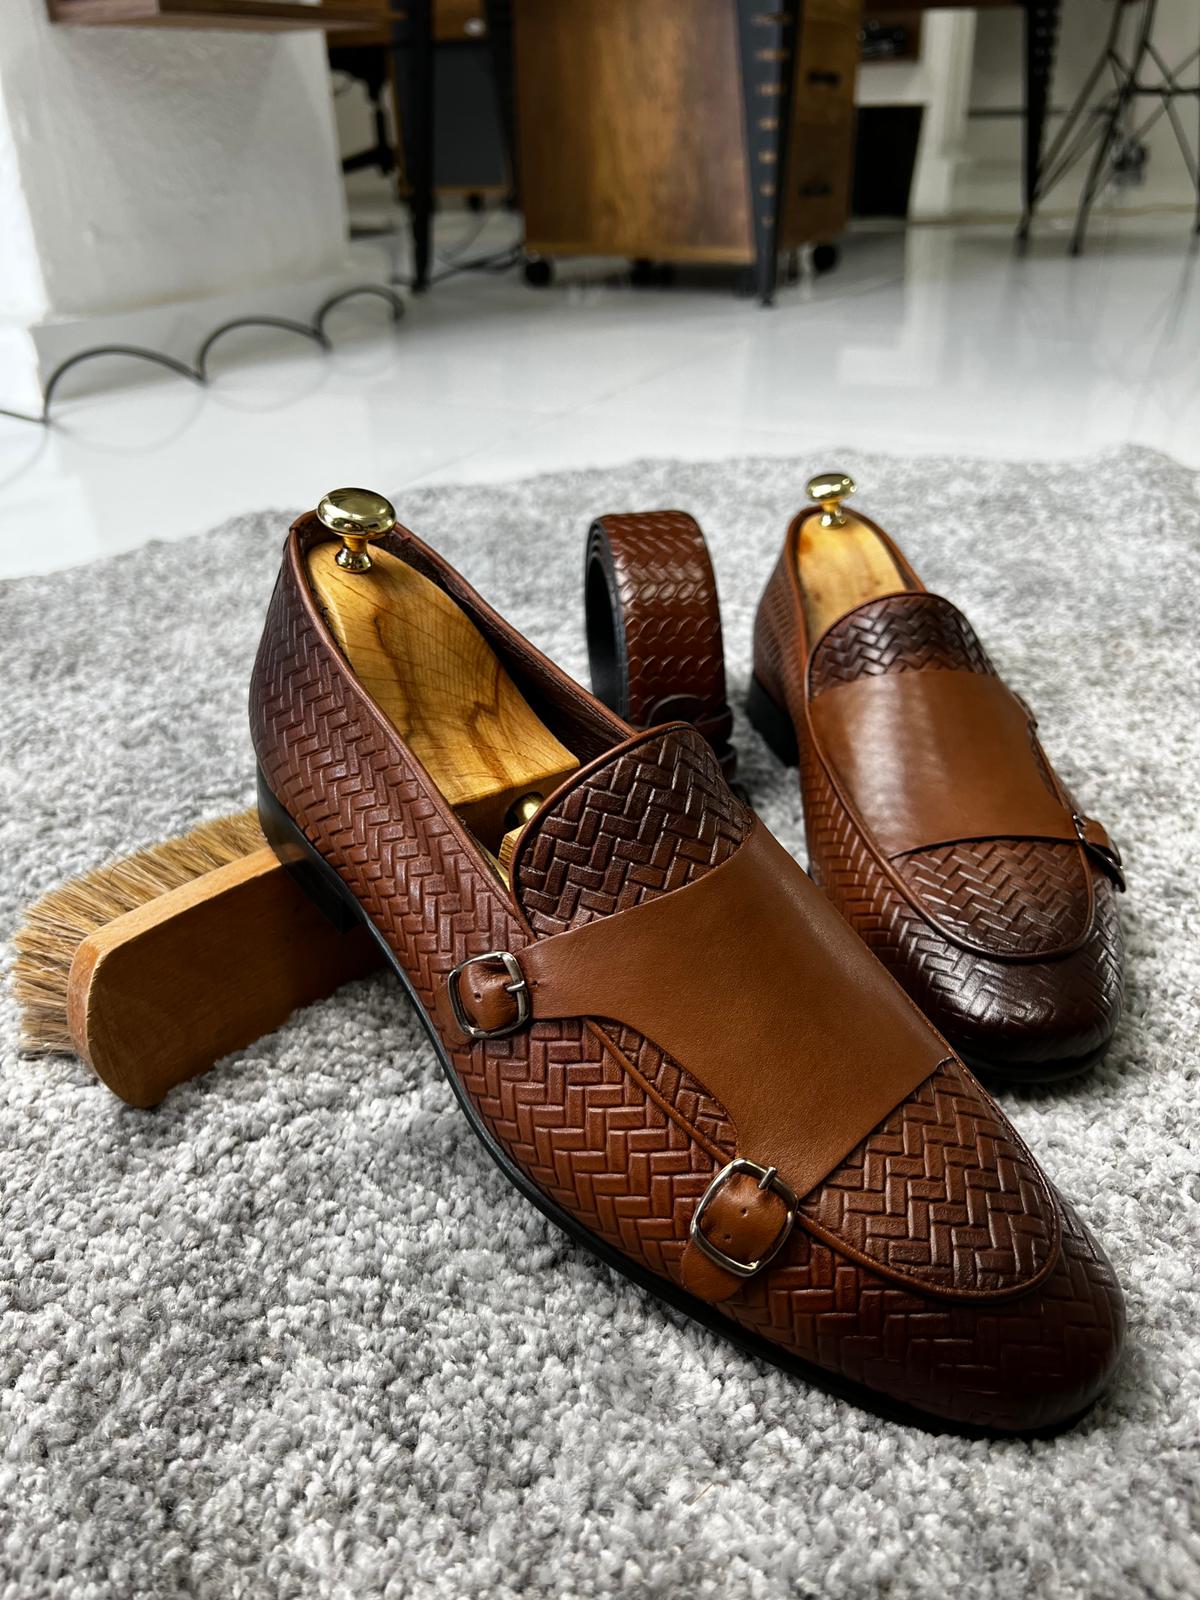 Bojoni Amato Special Edition Neolite Sole Double Buckled Tan Leather Loafer